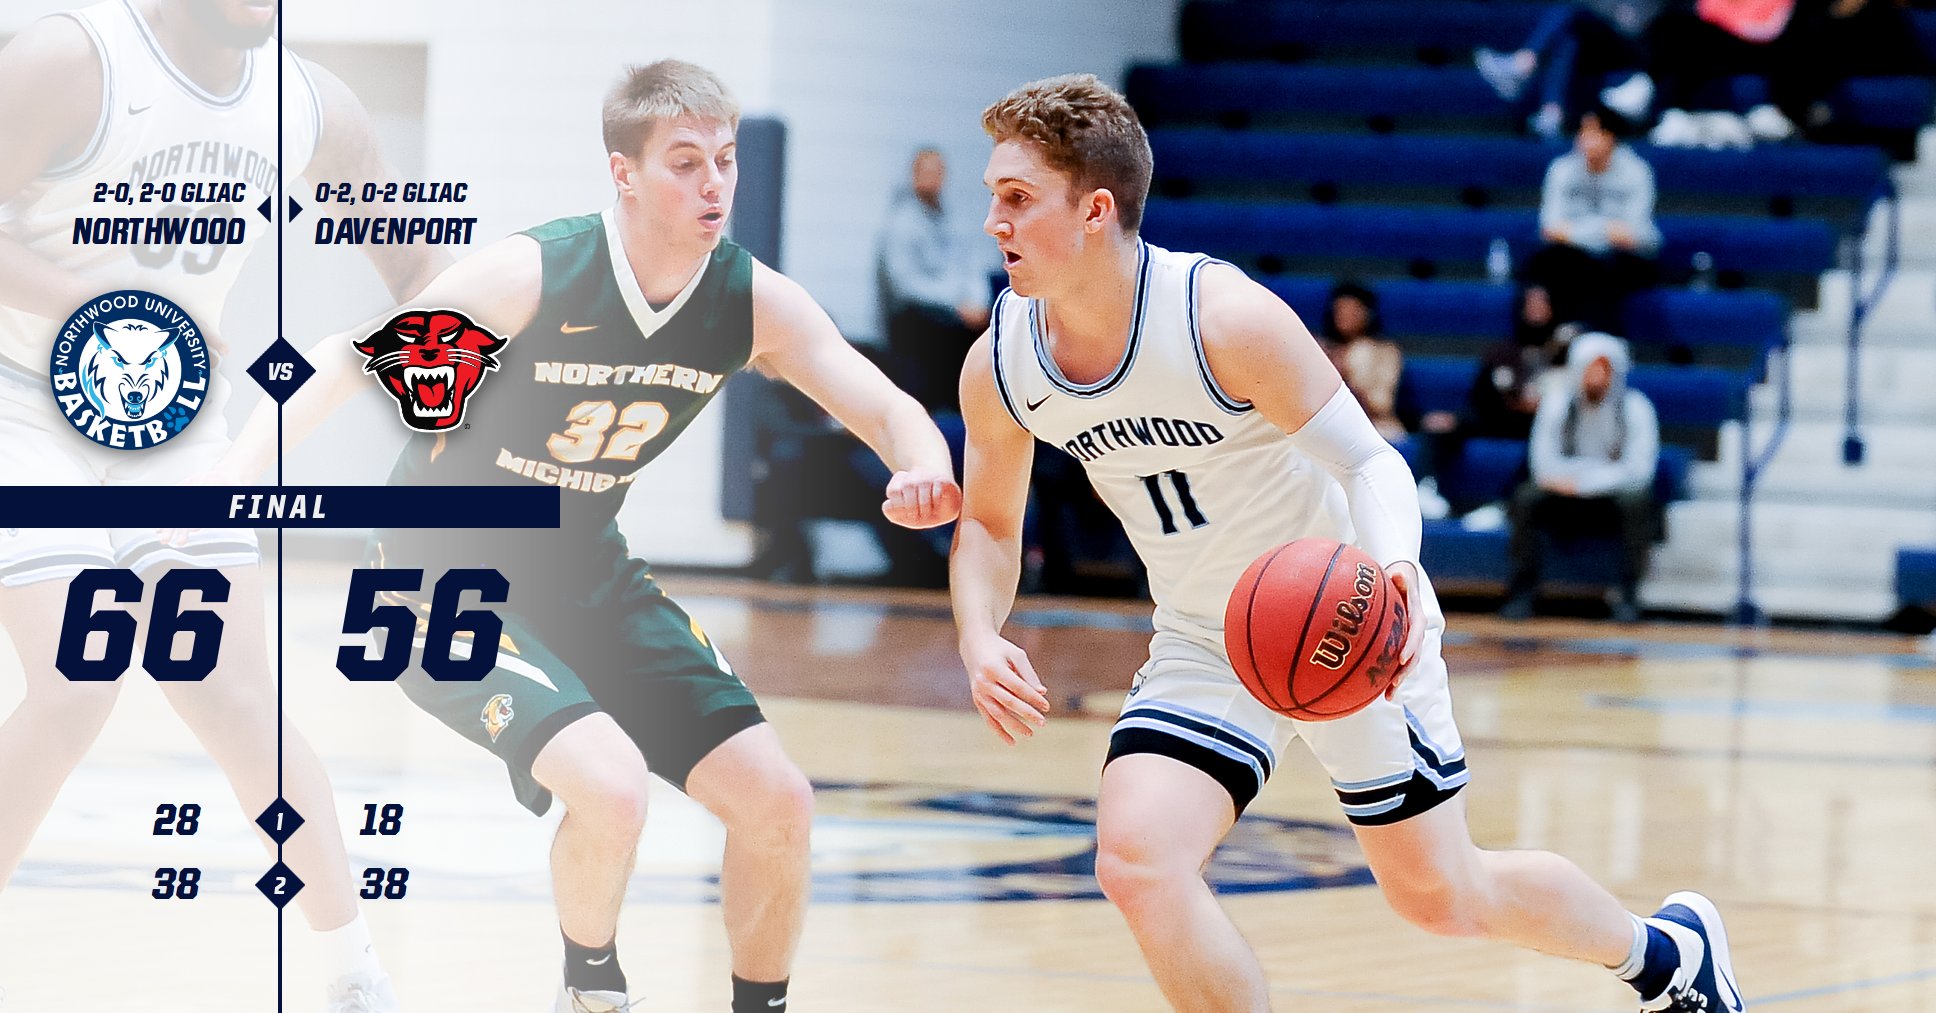 Men's Basketball Improves To 2-0 With 66-56 Win At Davenport